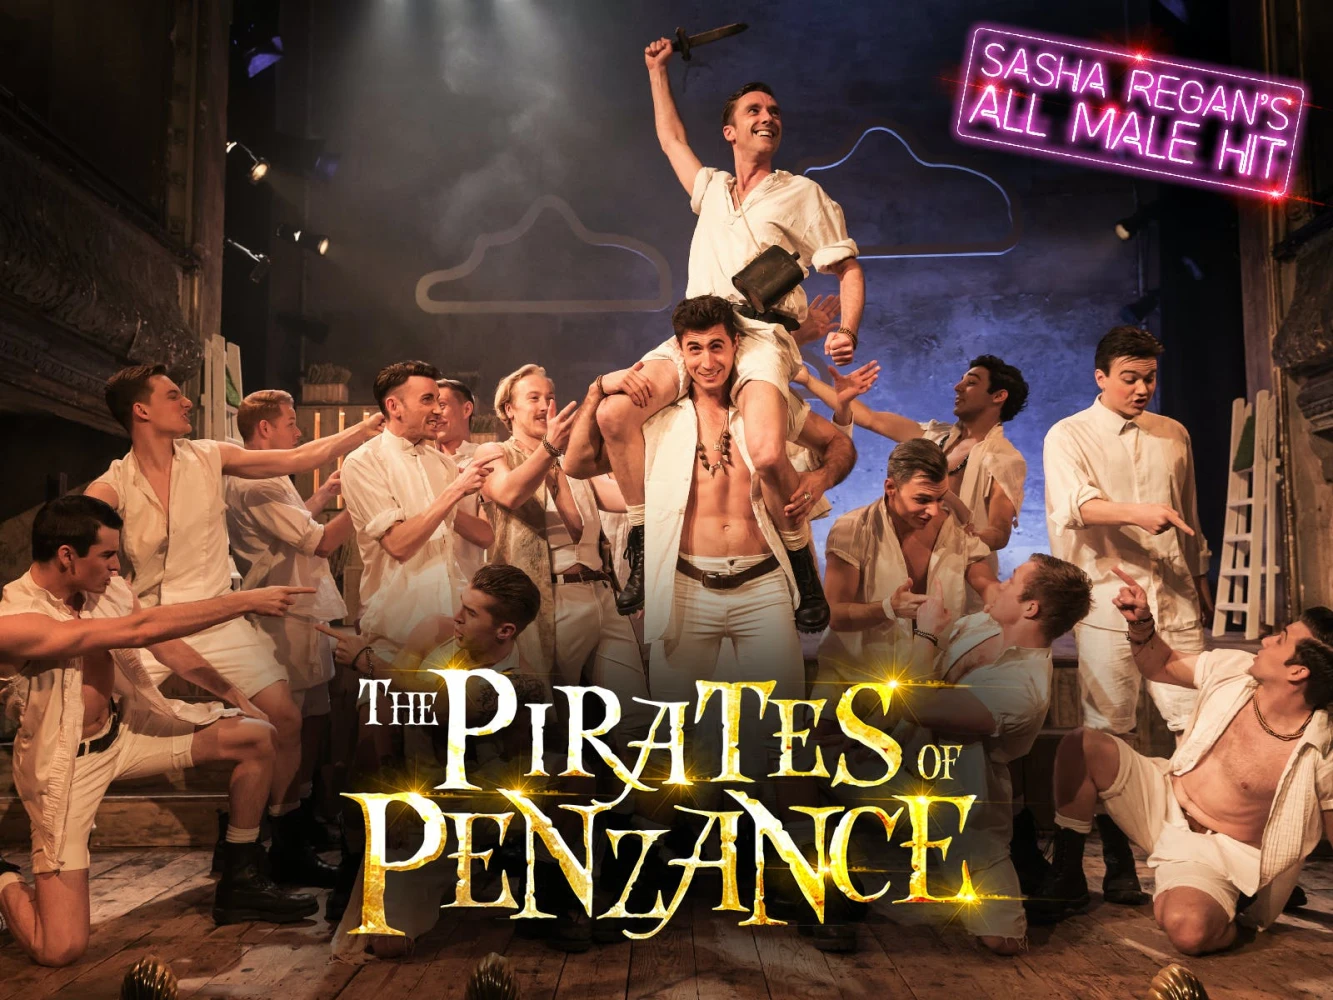 The Pirates of Penzance: What to expect - 3